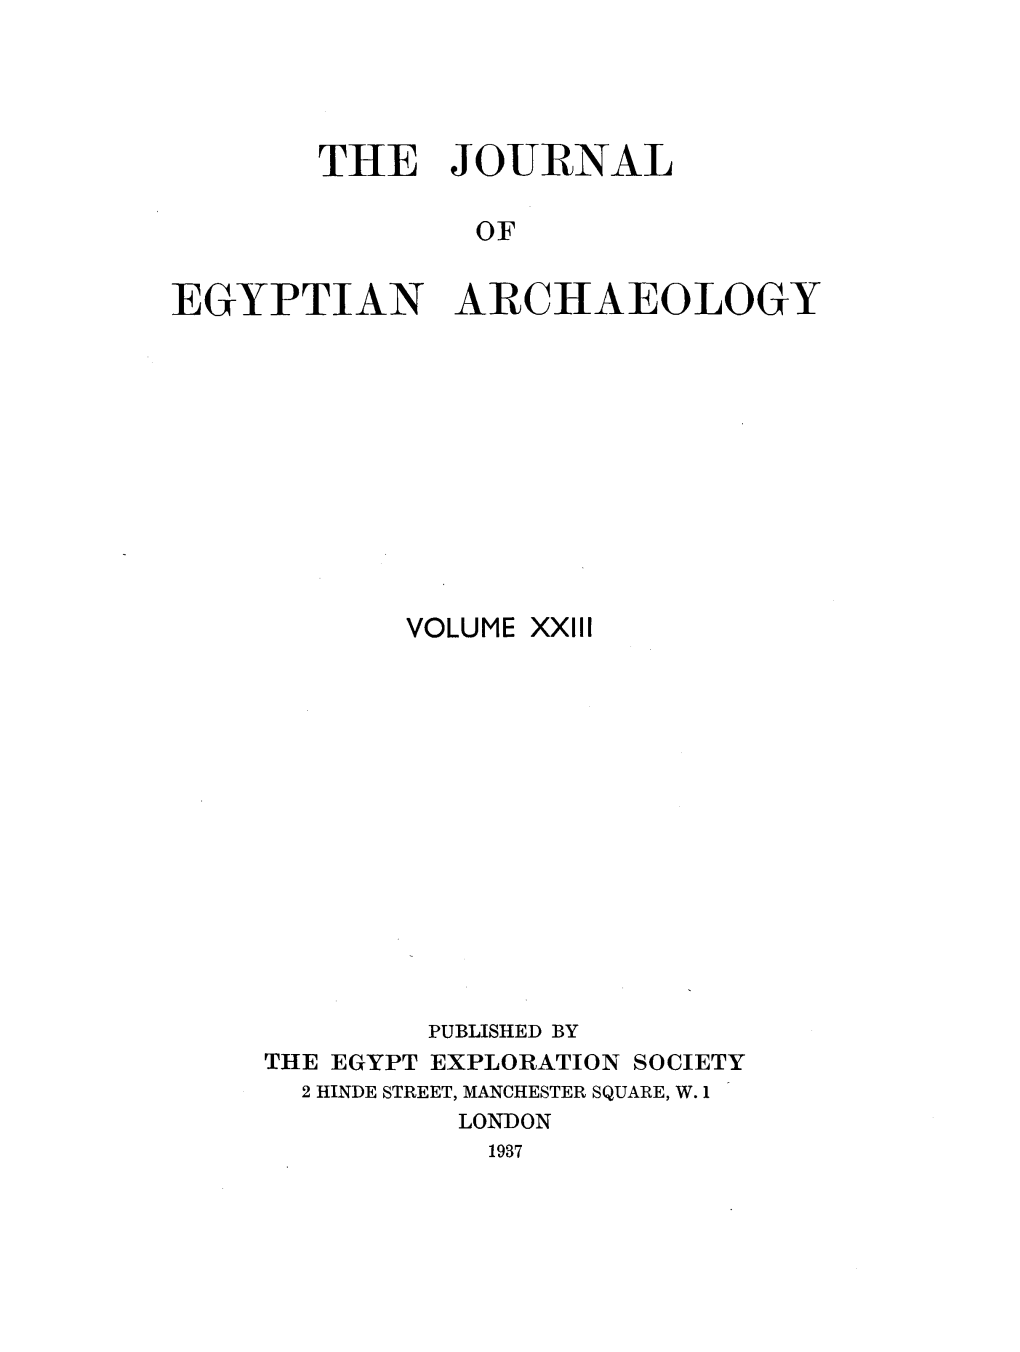 Journal of Egyptian Archaeology, Vol. 23(1), 1937